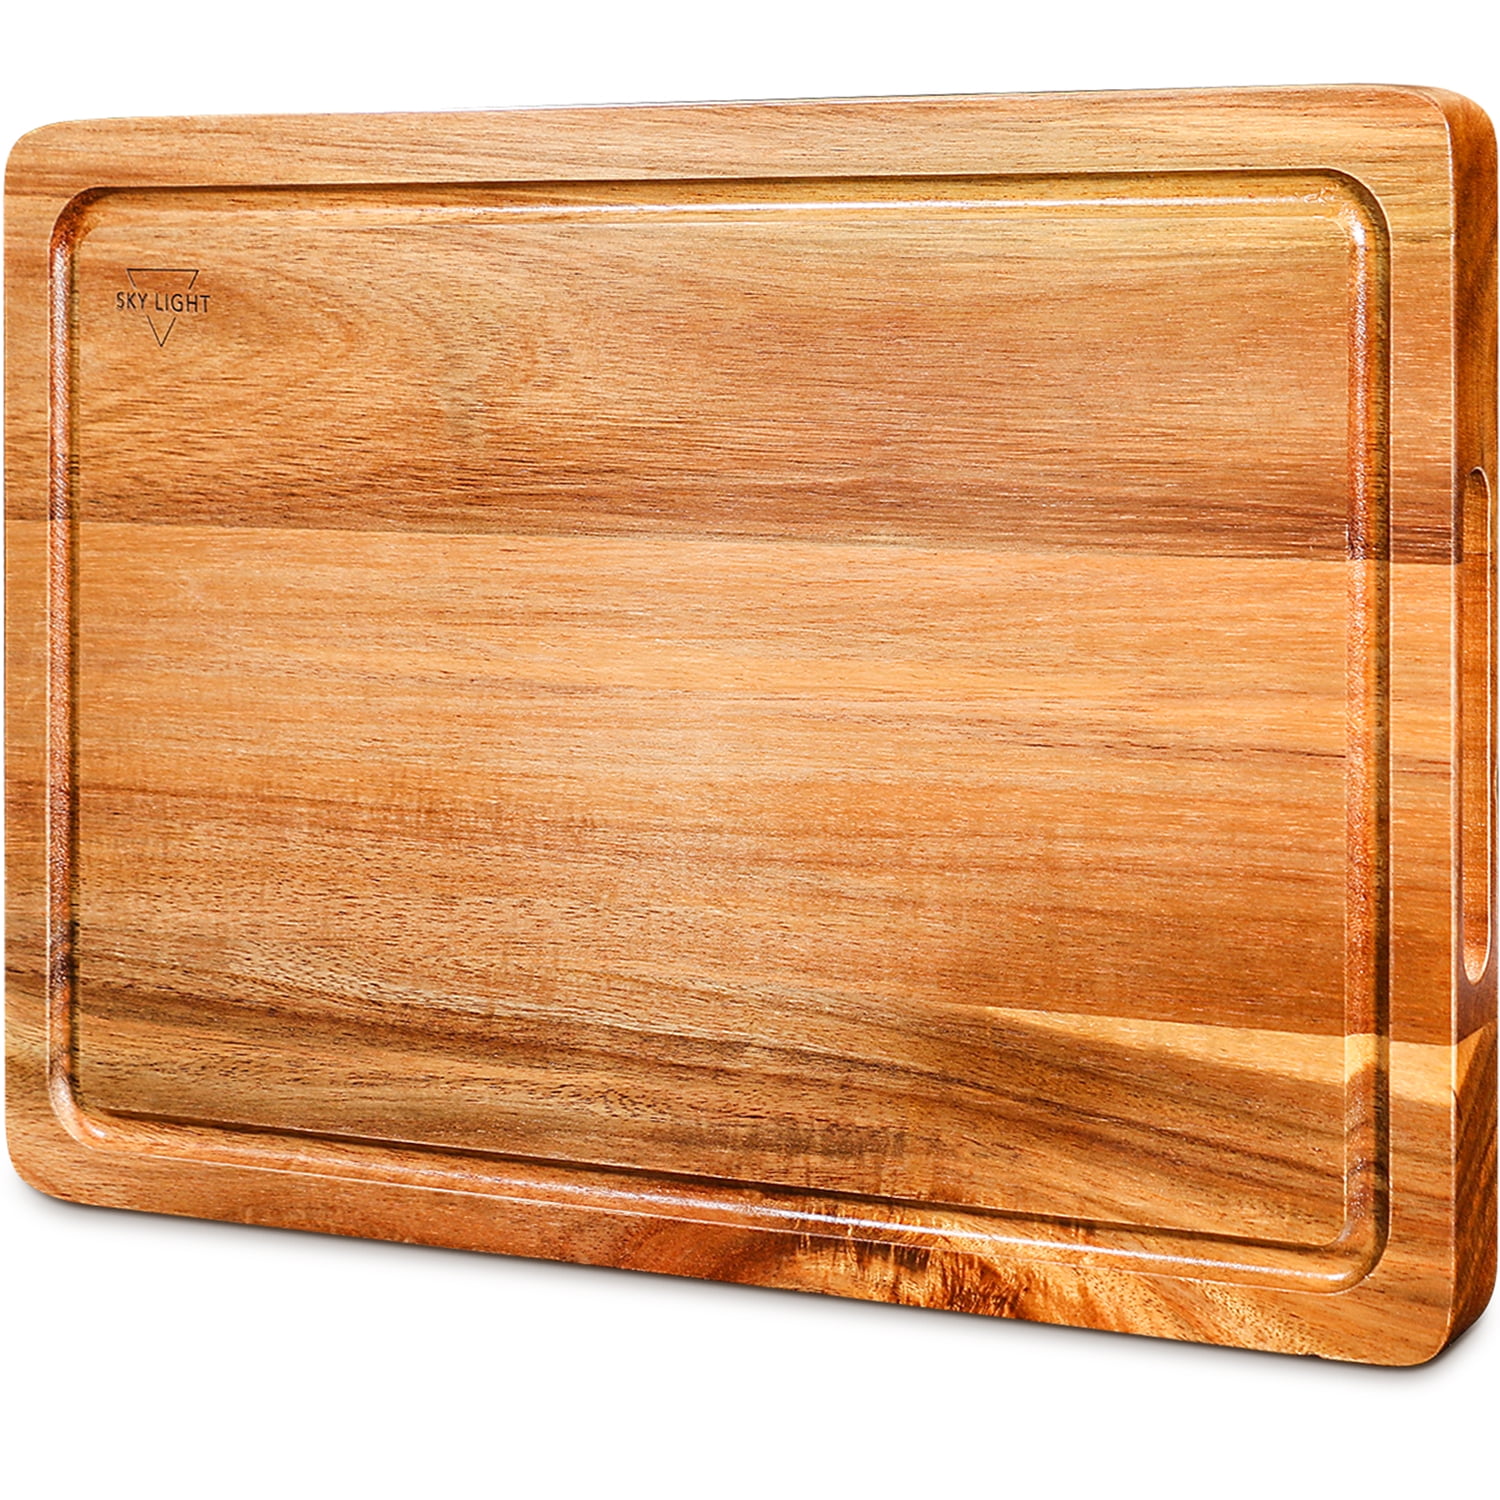  TALENT Wood Cutting Board, 100% Natural Wooden Cutting Boards  for Kitchen, Acacia Wood Chopping Board with Juice Groove, Heavy Duty  Serving Tray Butcher Block Boards, Pre Oiled, 18.9 x 12.8 x